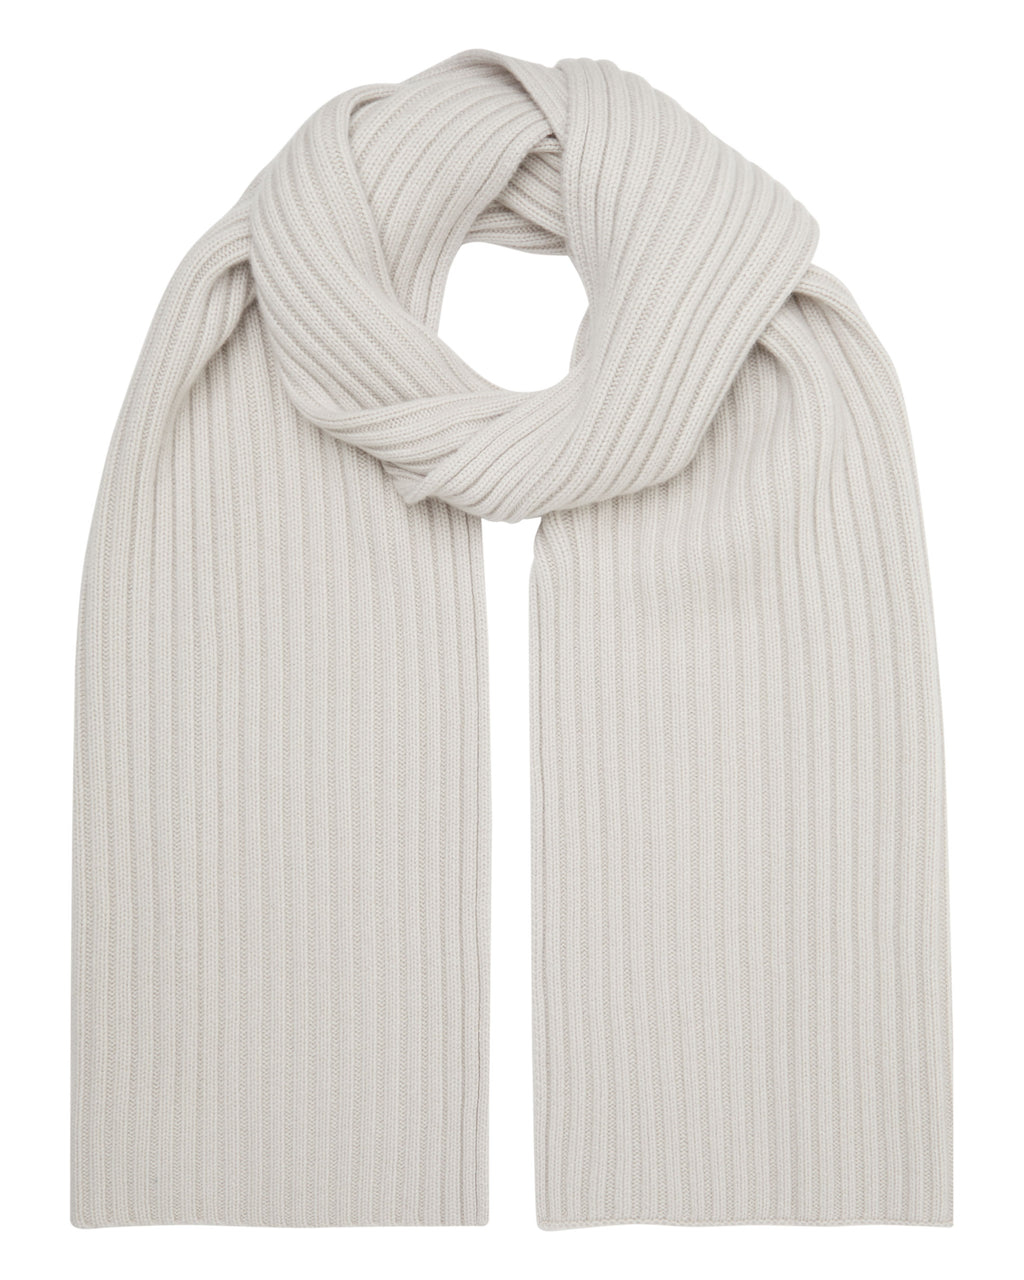 Unisex Woven Cashmere Scarf Camel Brown